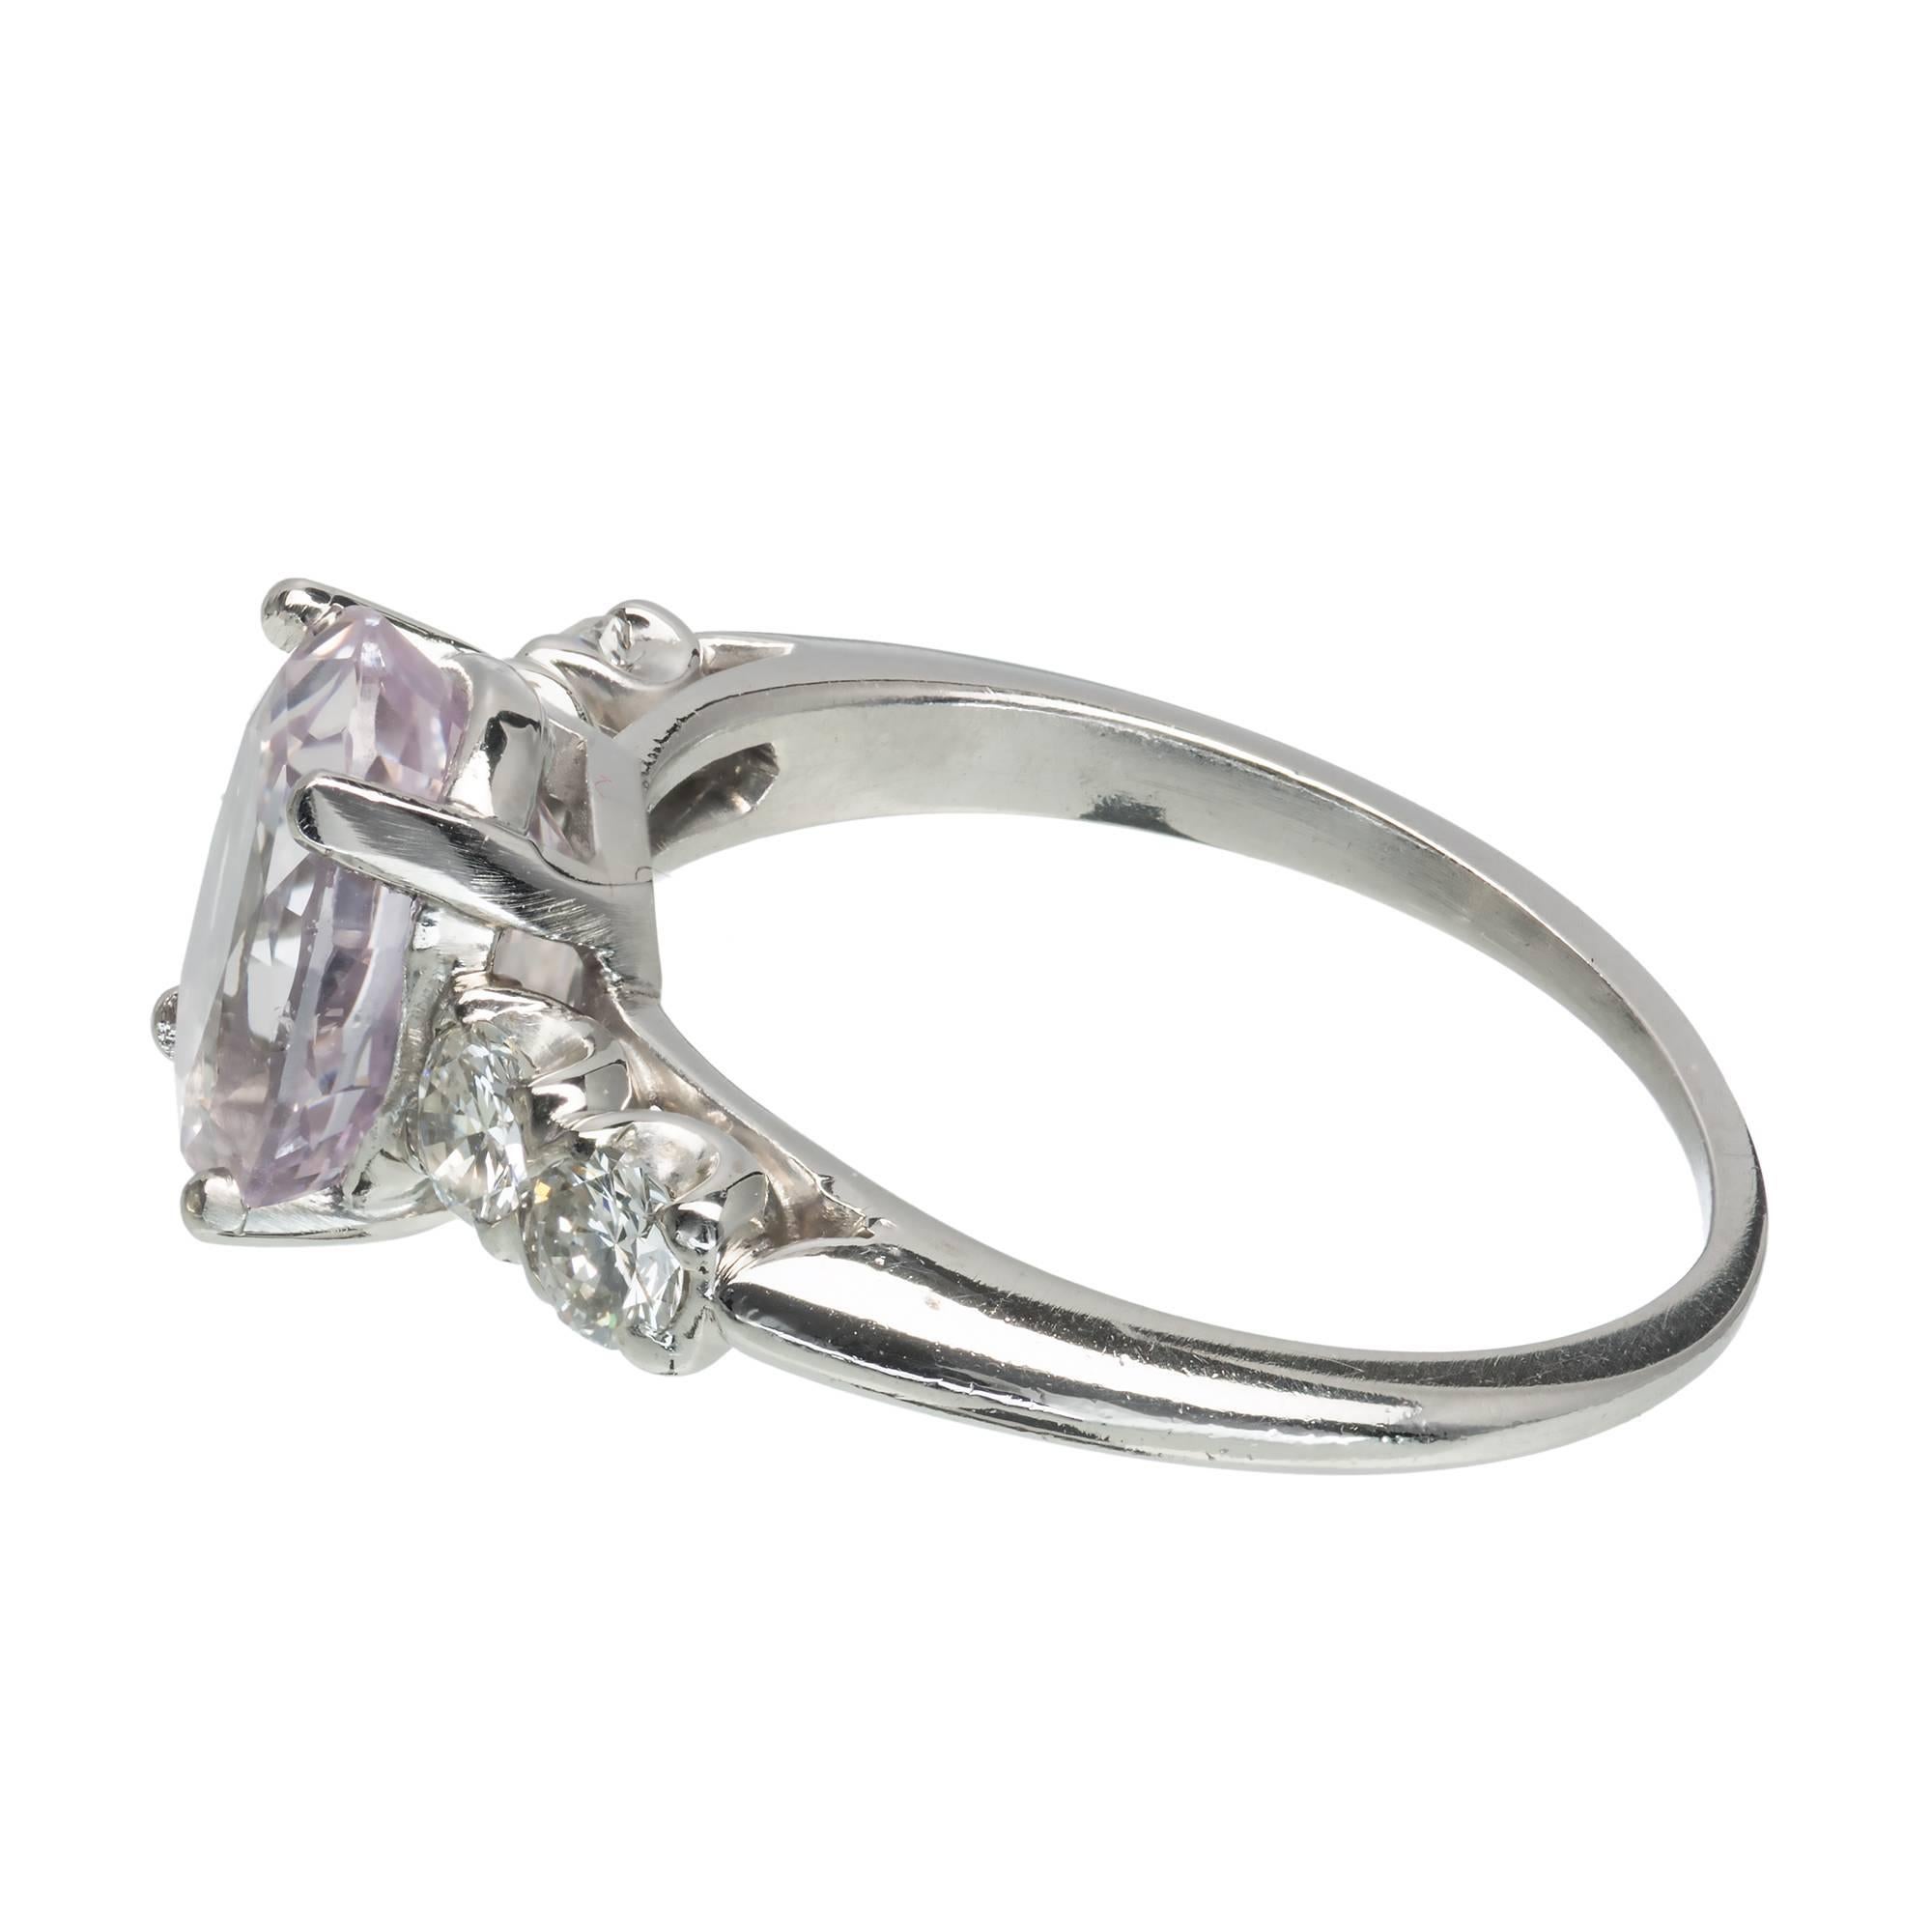 Oval Cut 3.39 Carat GIA Certified Pink Oval Sapphire Diamond Platinum Engagement Ring For Sale